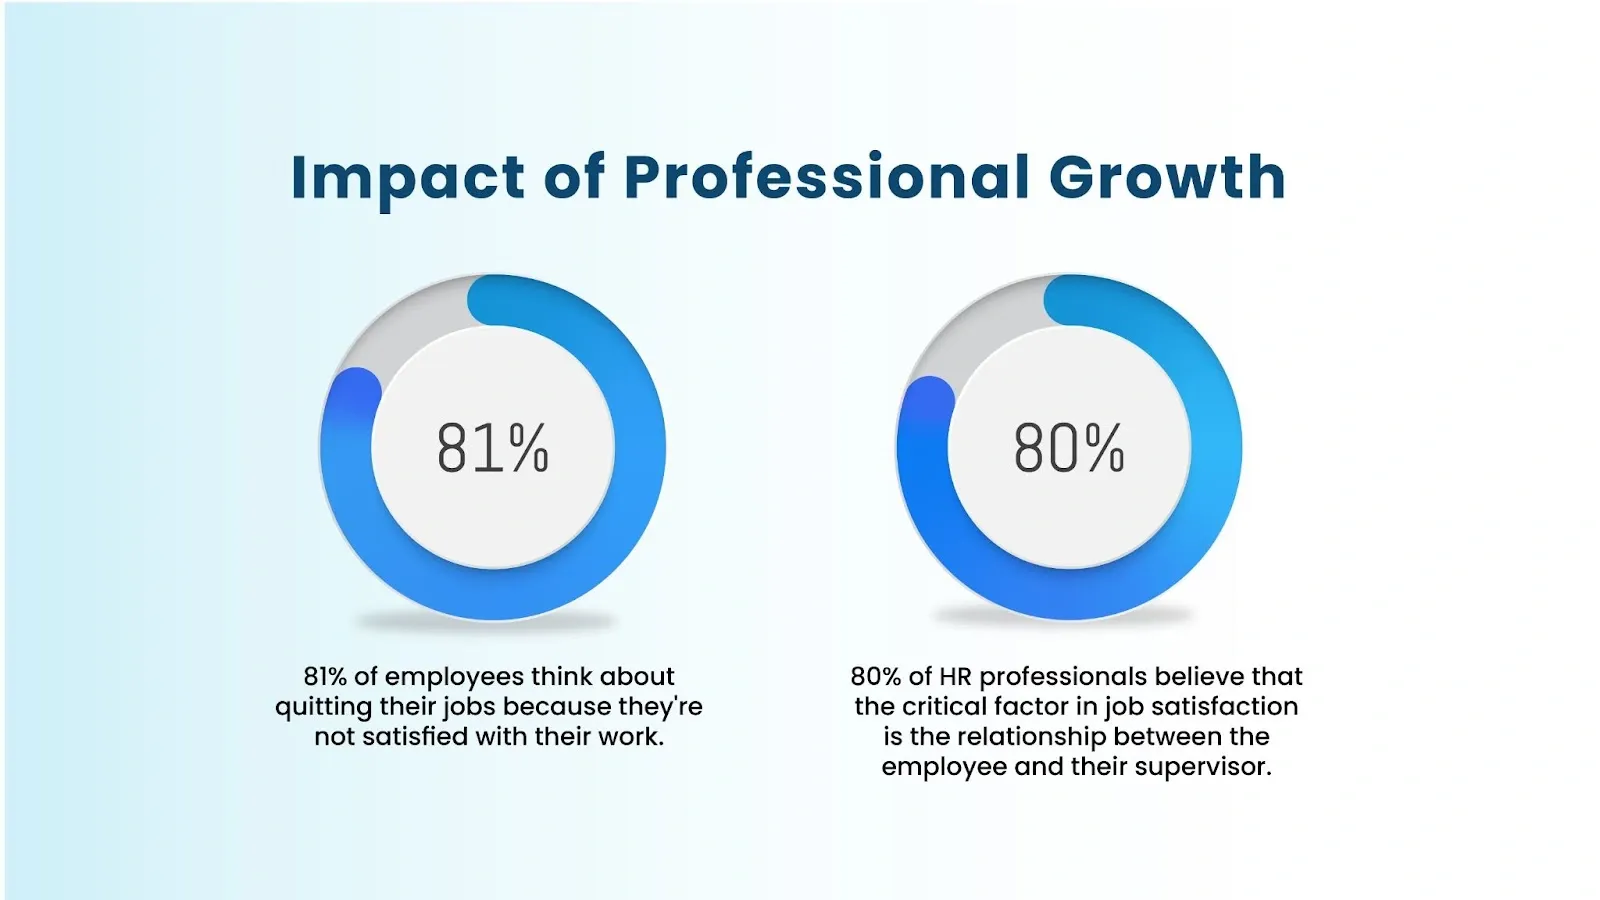 pie chart showing Impact of Professional Growth